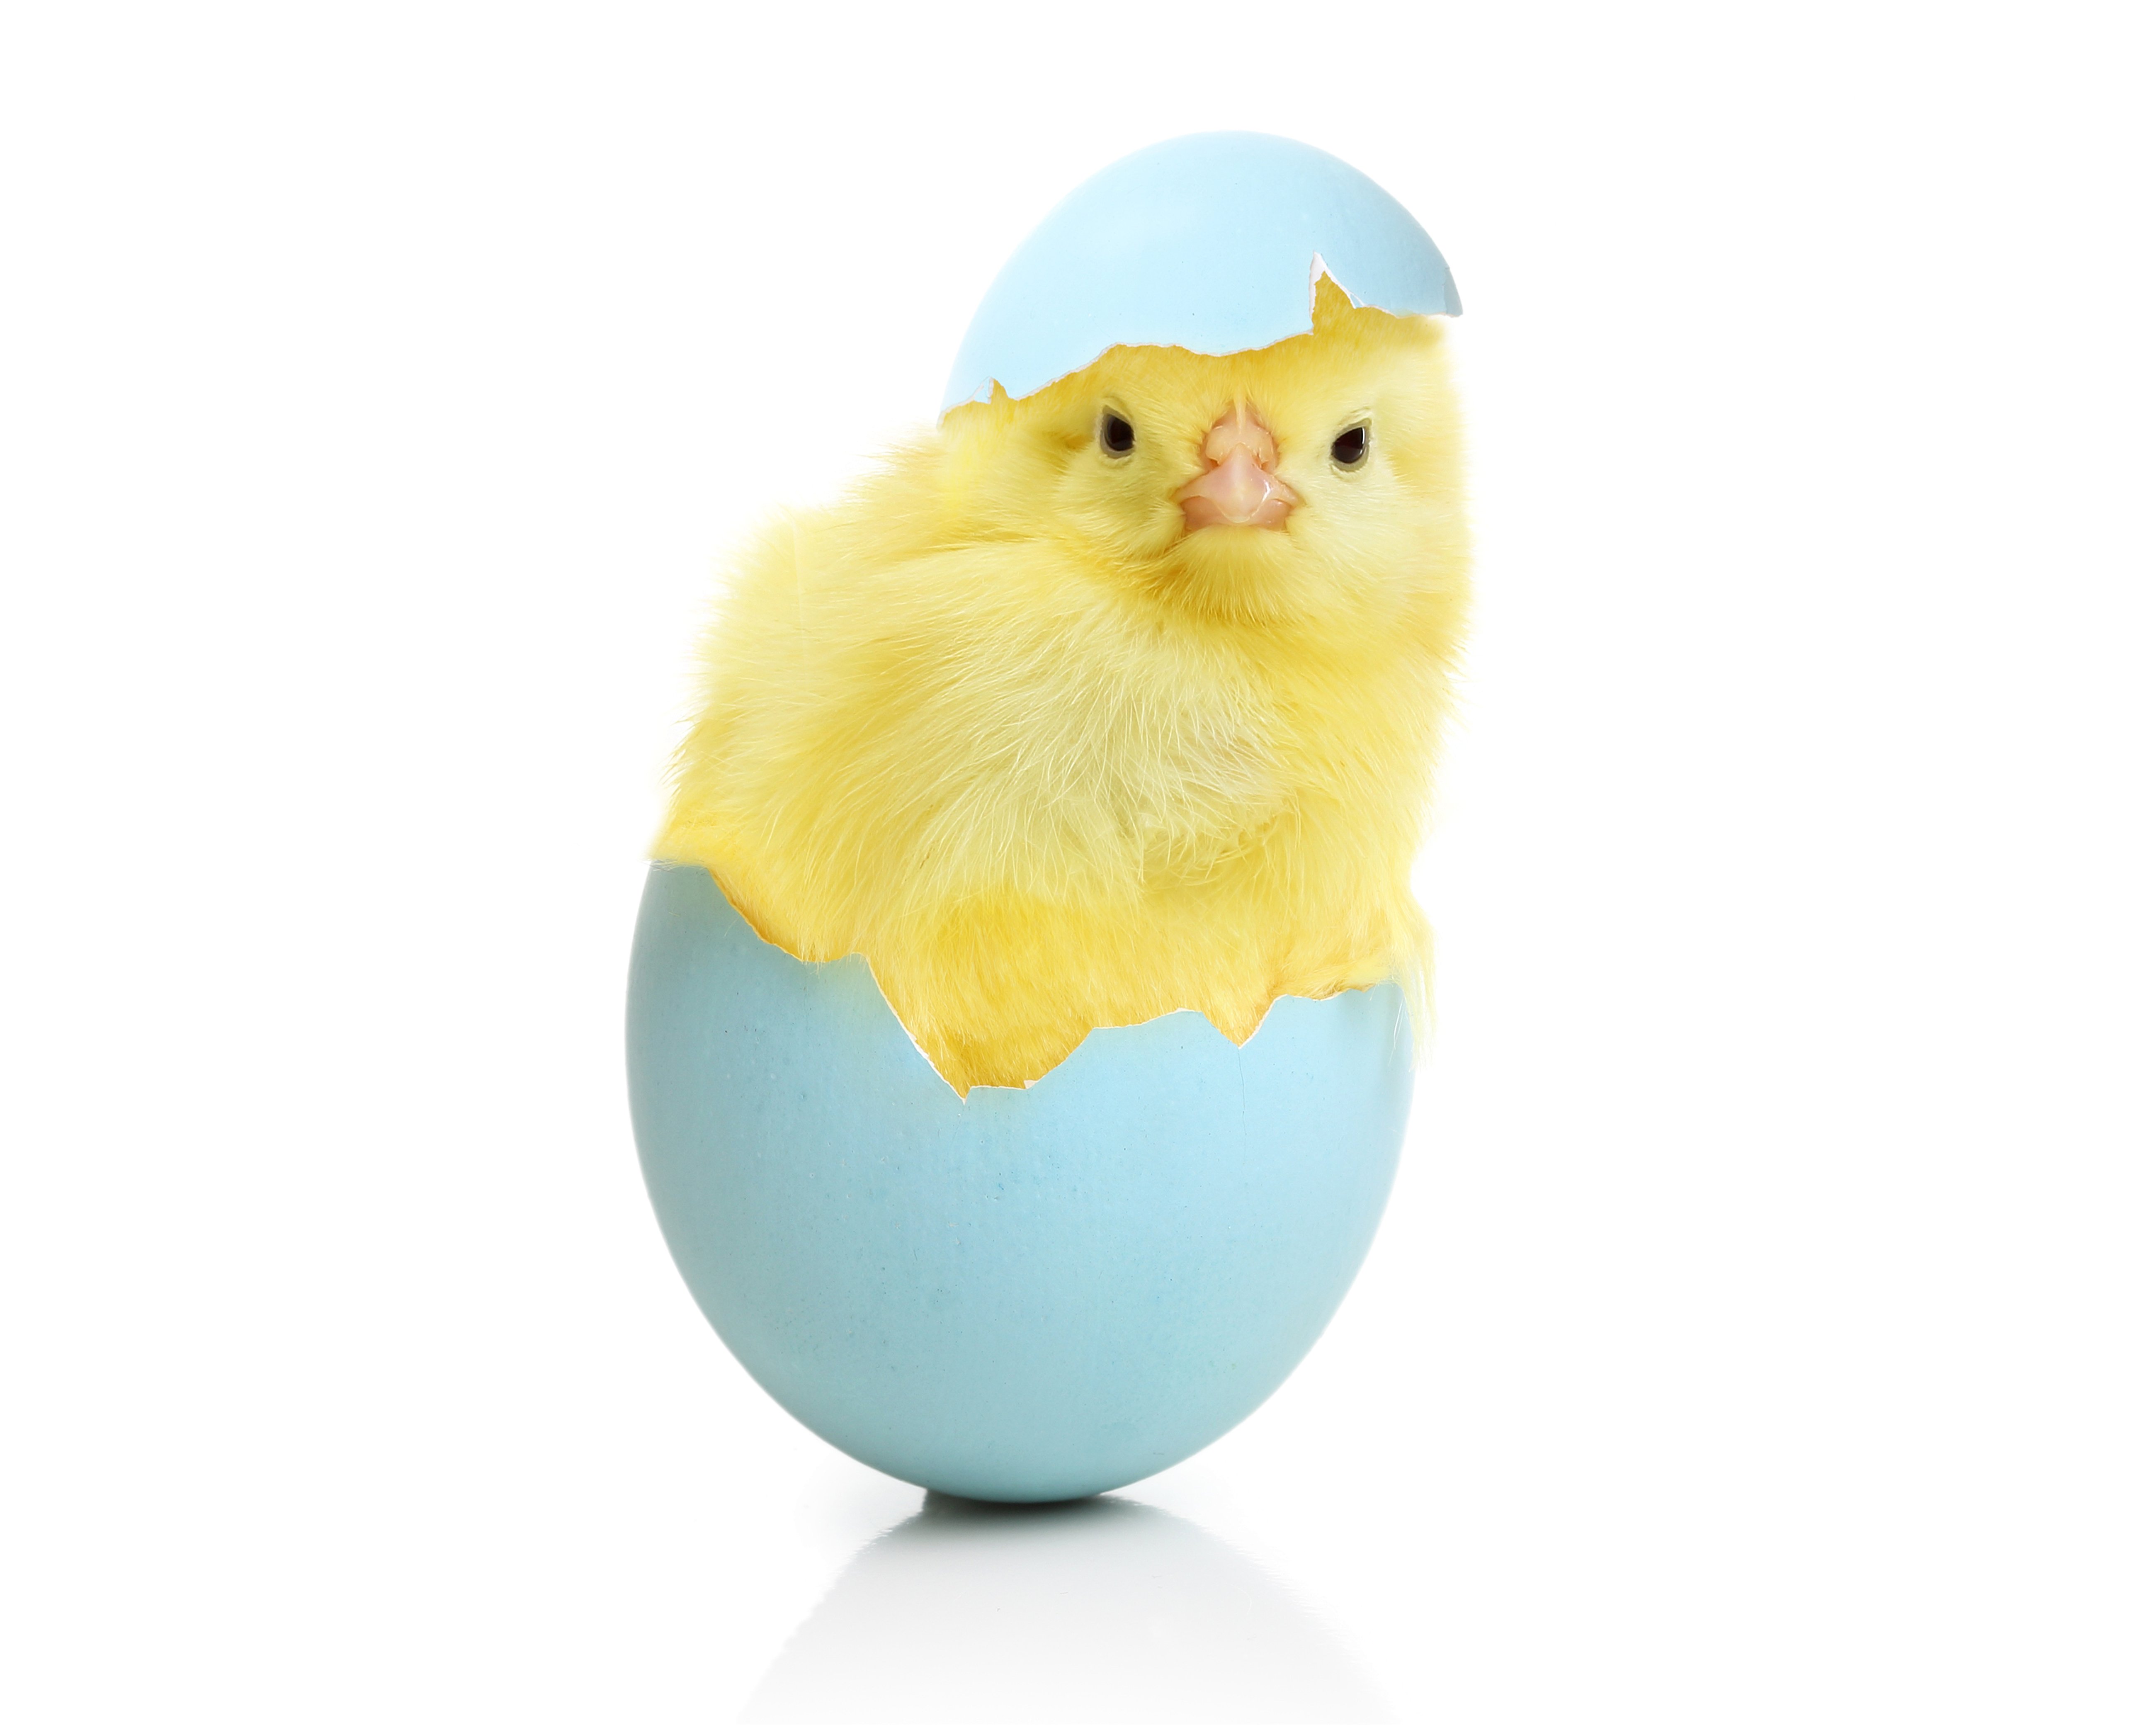 Chicken Eggs Animals egg easter chick baby wallpaper 5200x4160